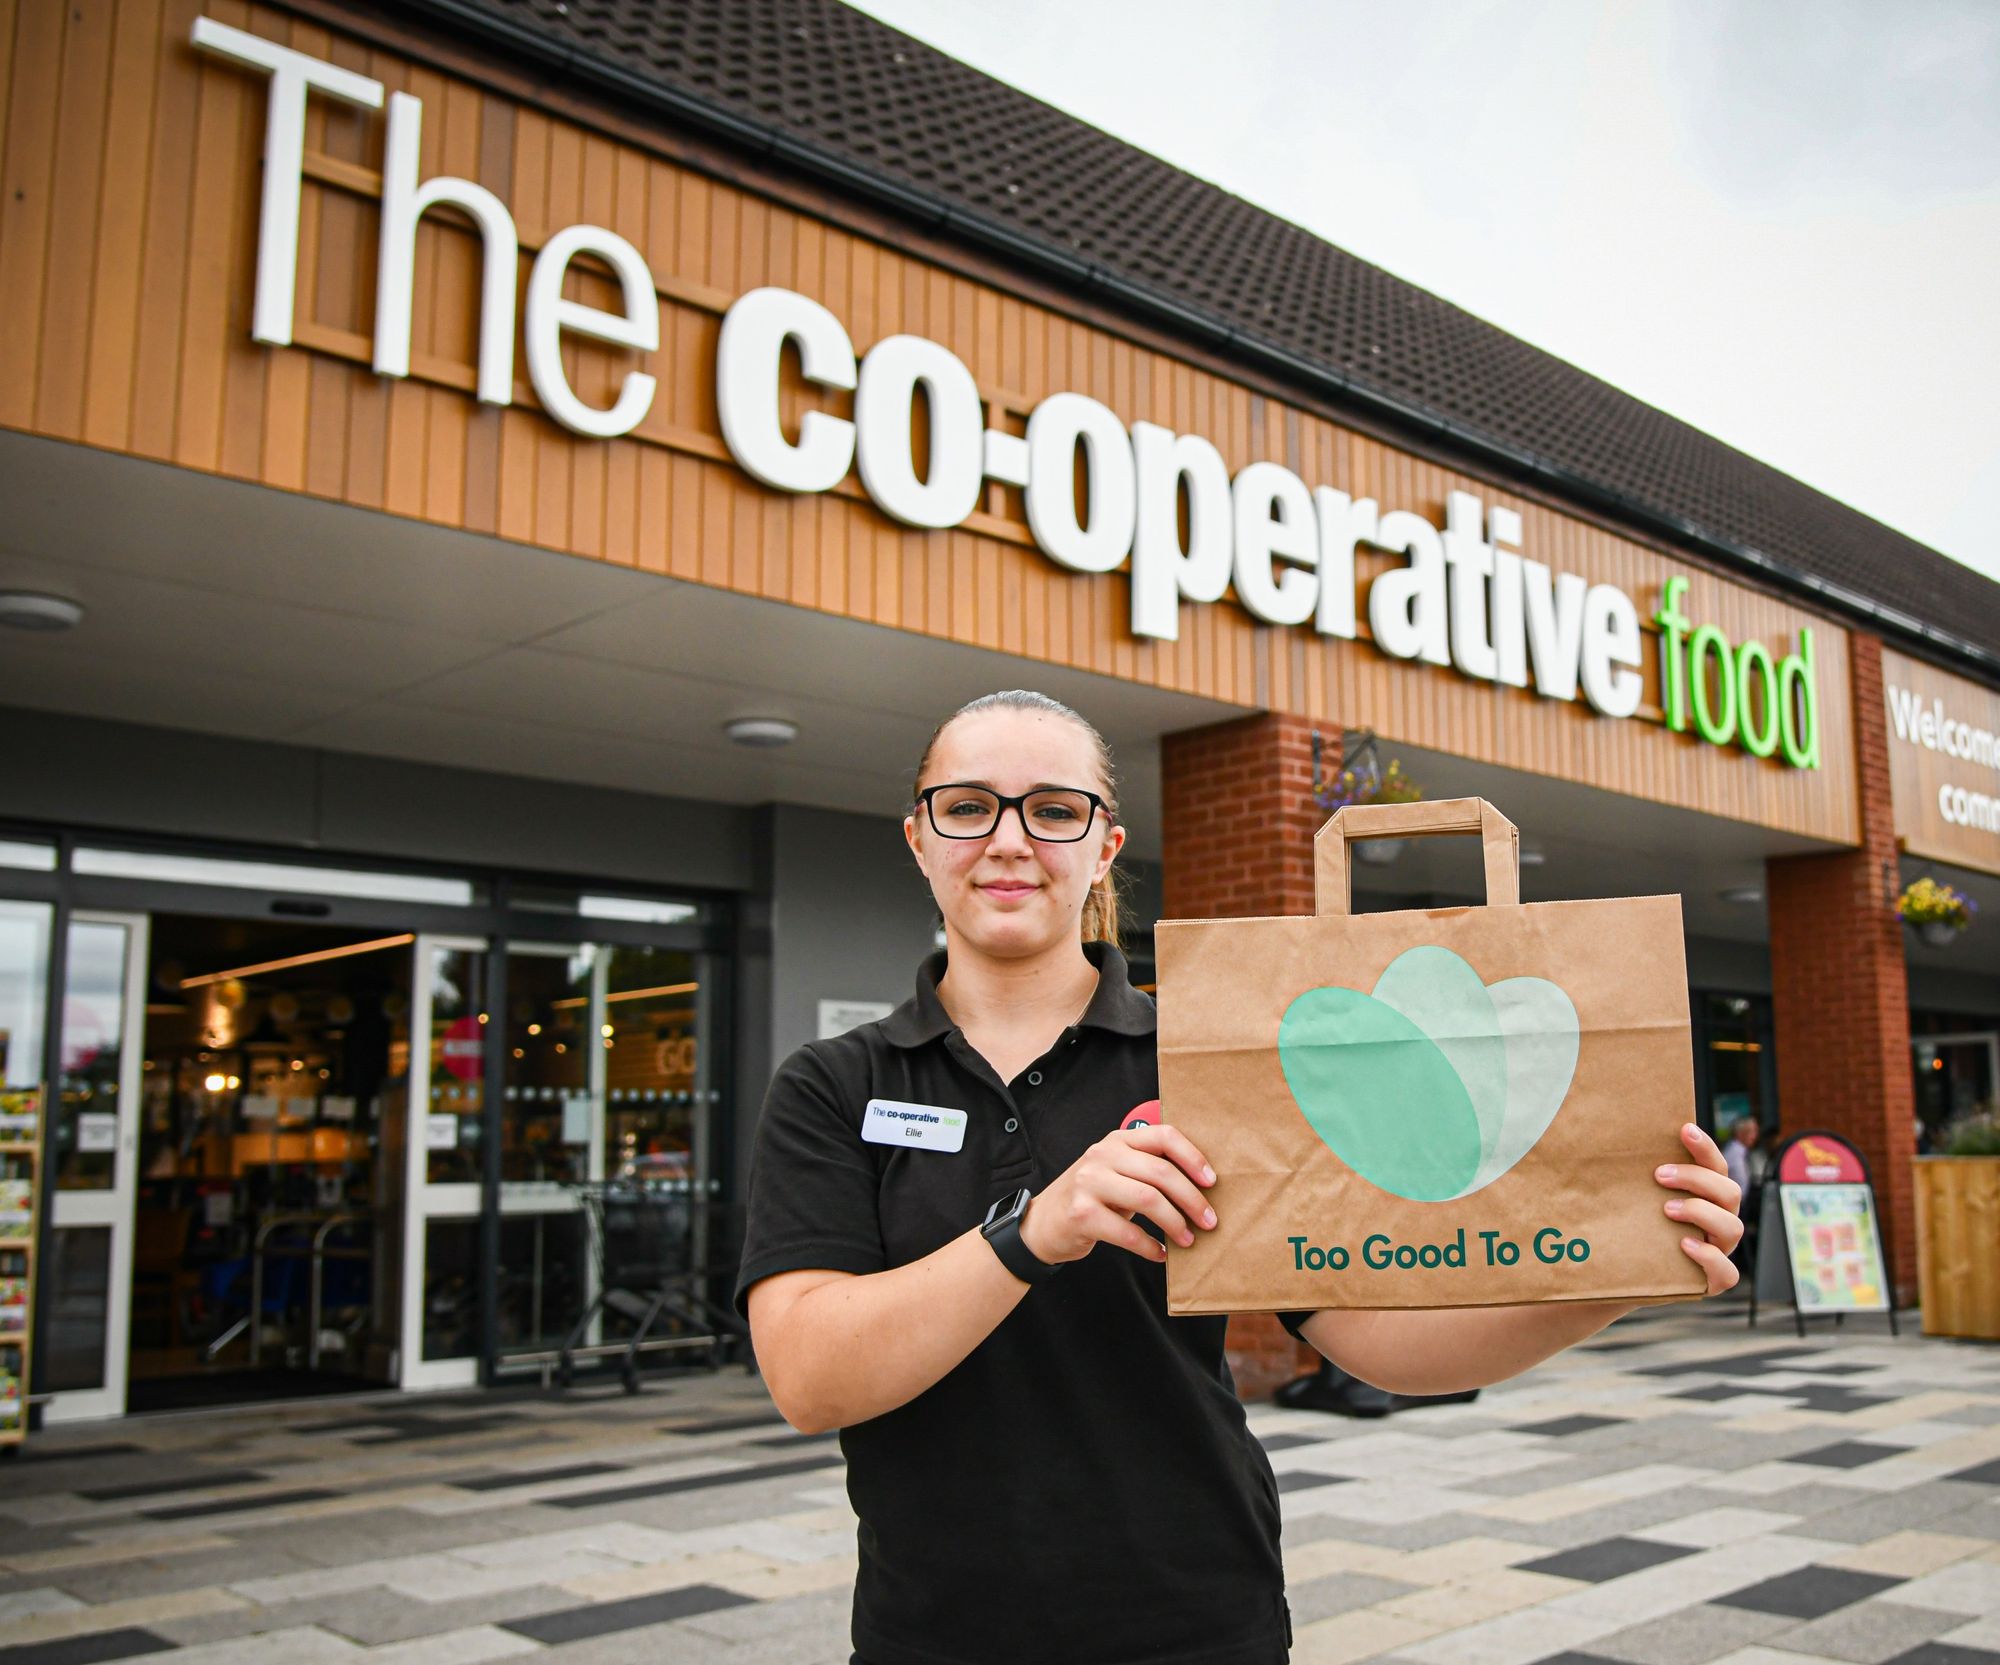 Central England Co-op partners with Too Good To Go to help it reduce food waste even further